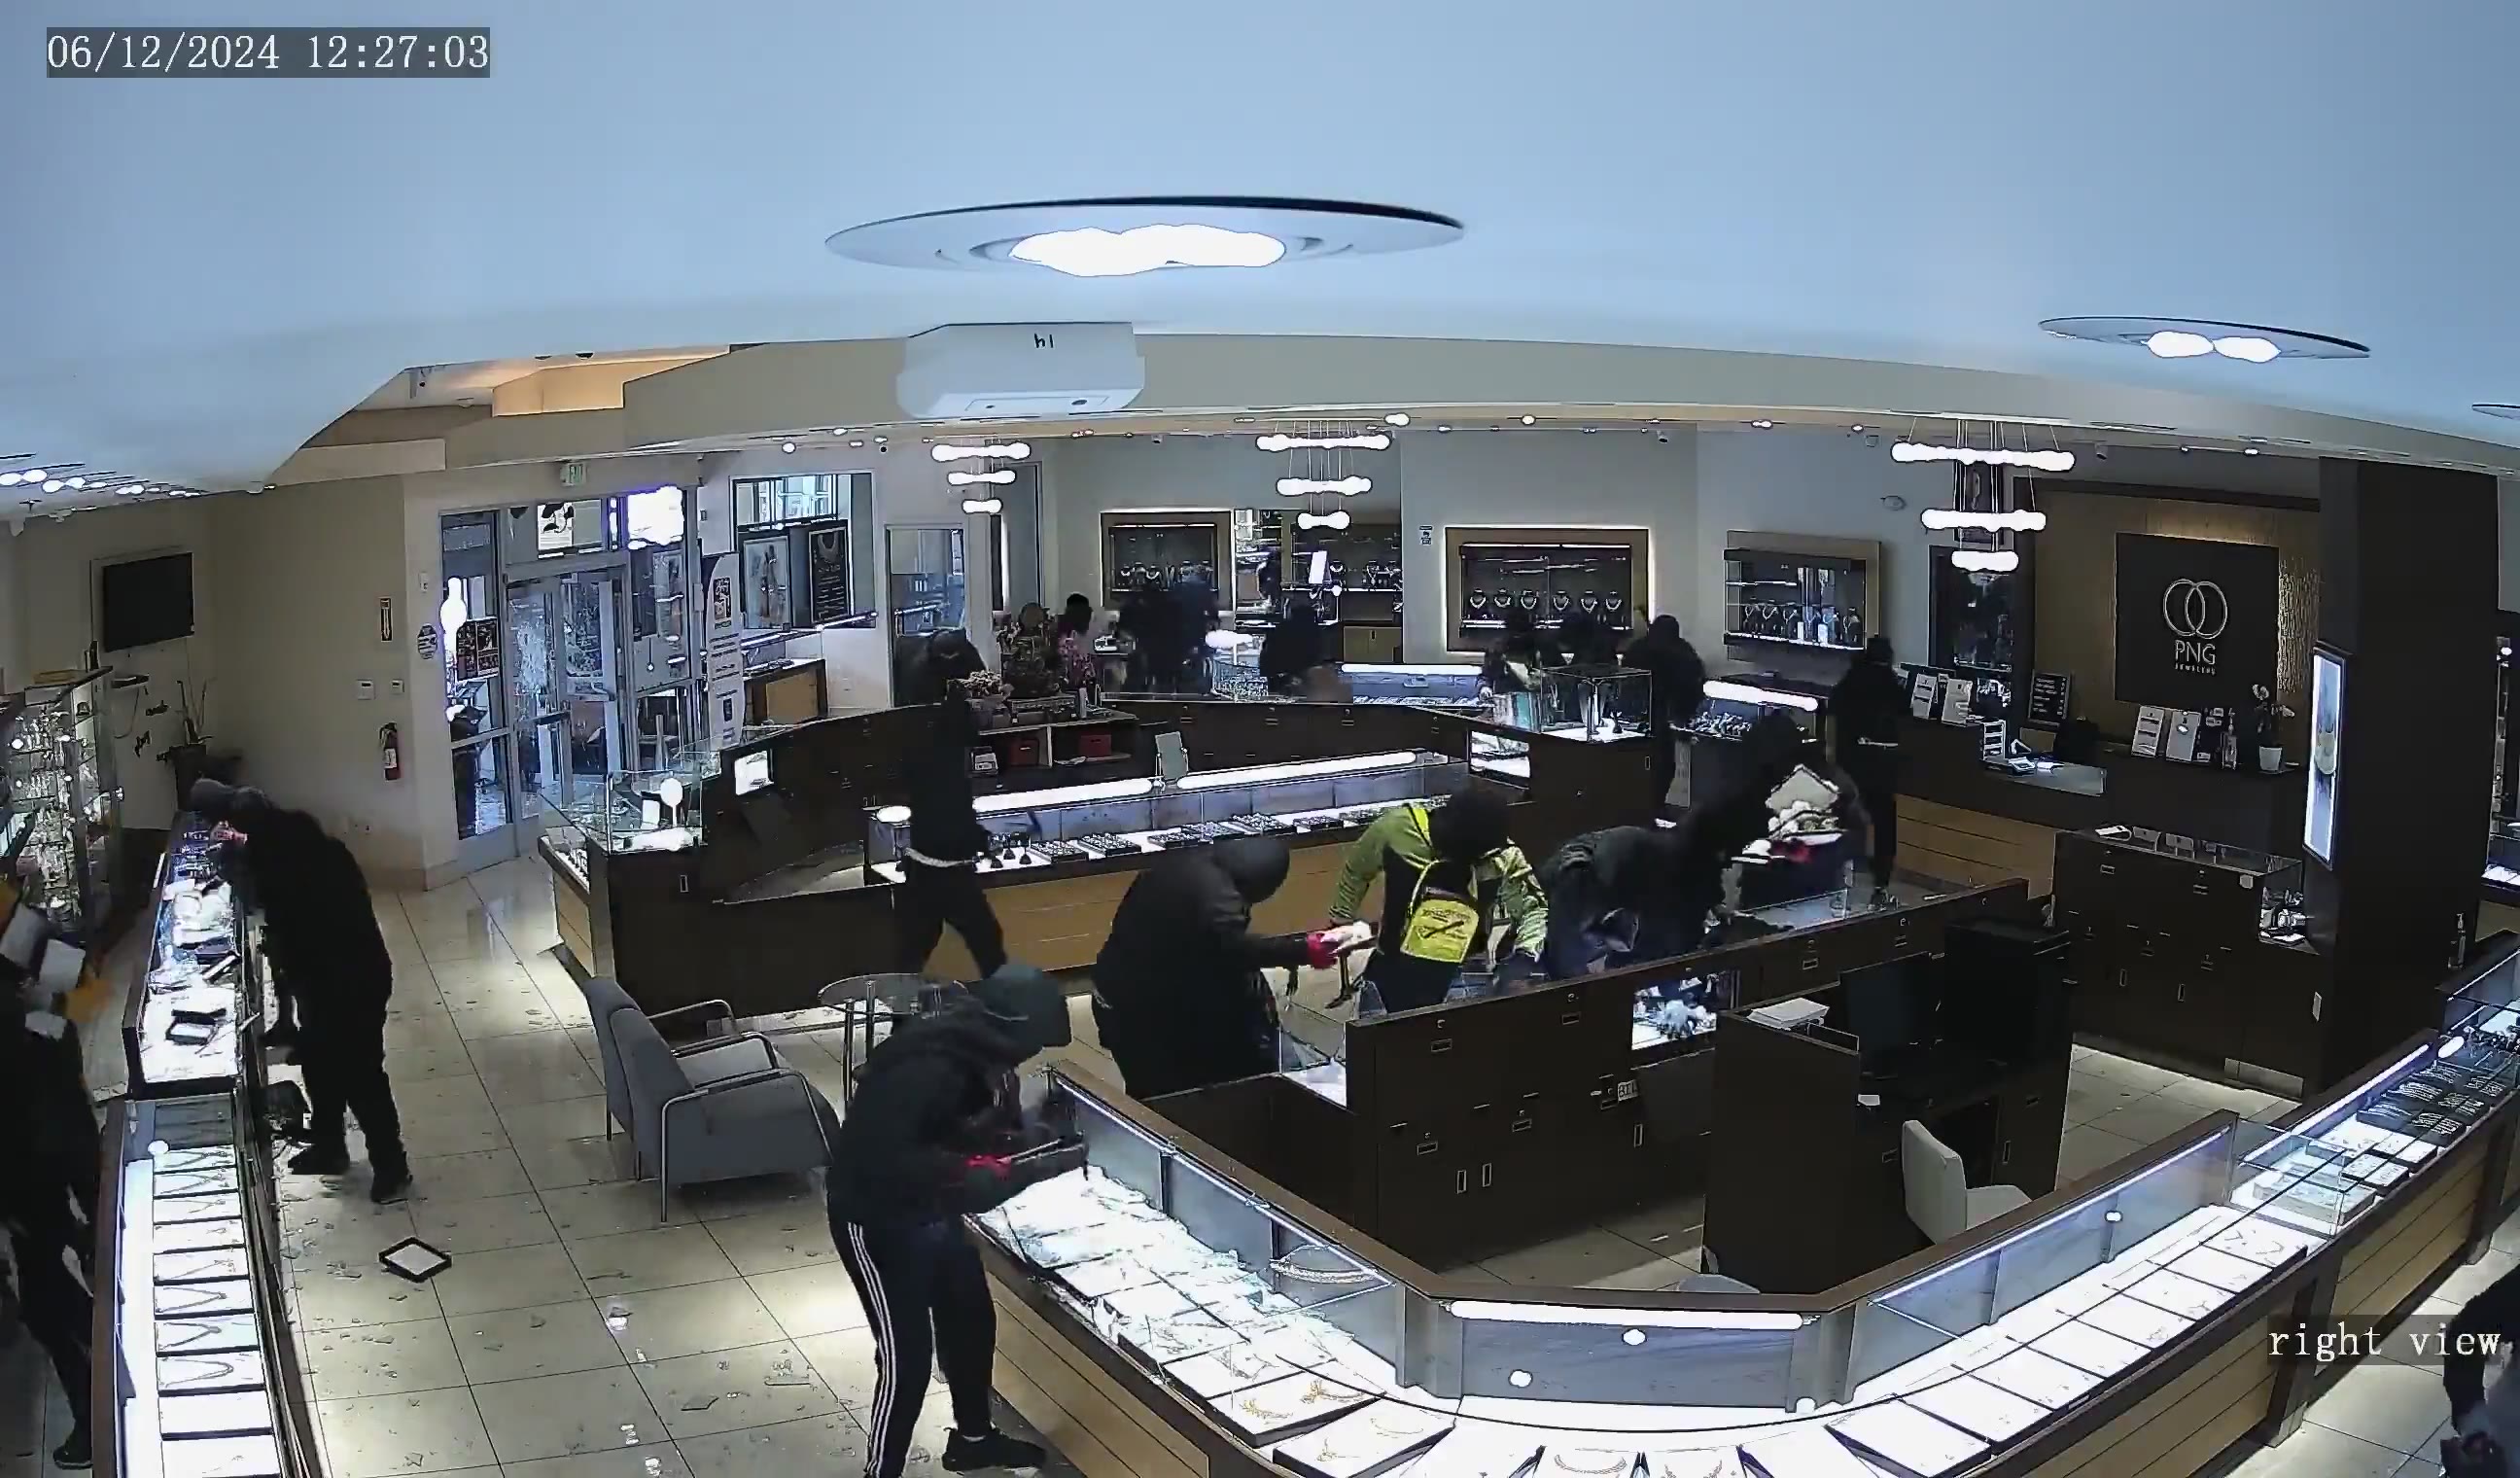 Jewelry store overwhelmed in shocking Bay Area smash &amp; grab robbery